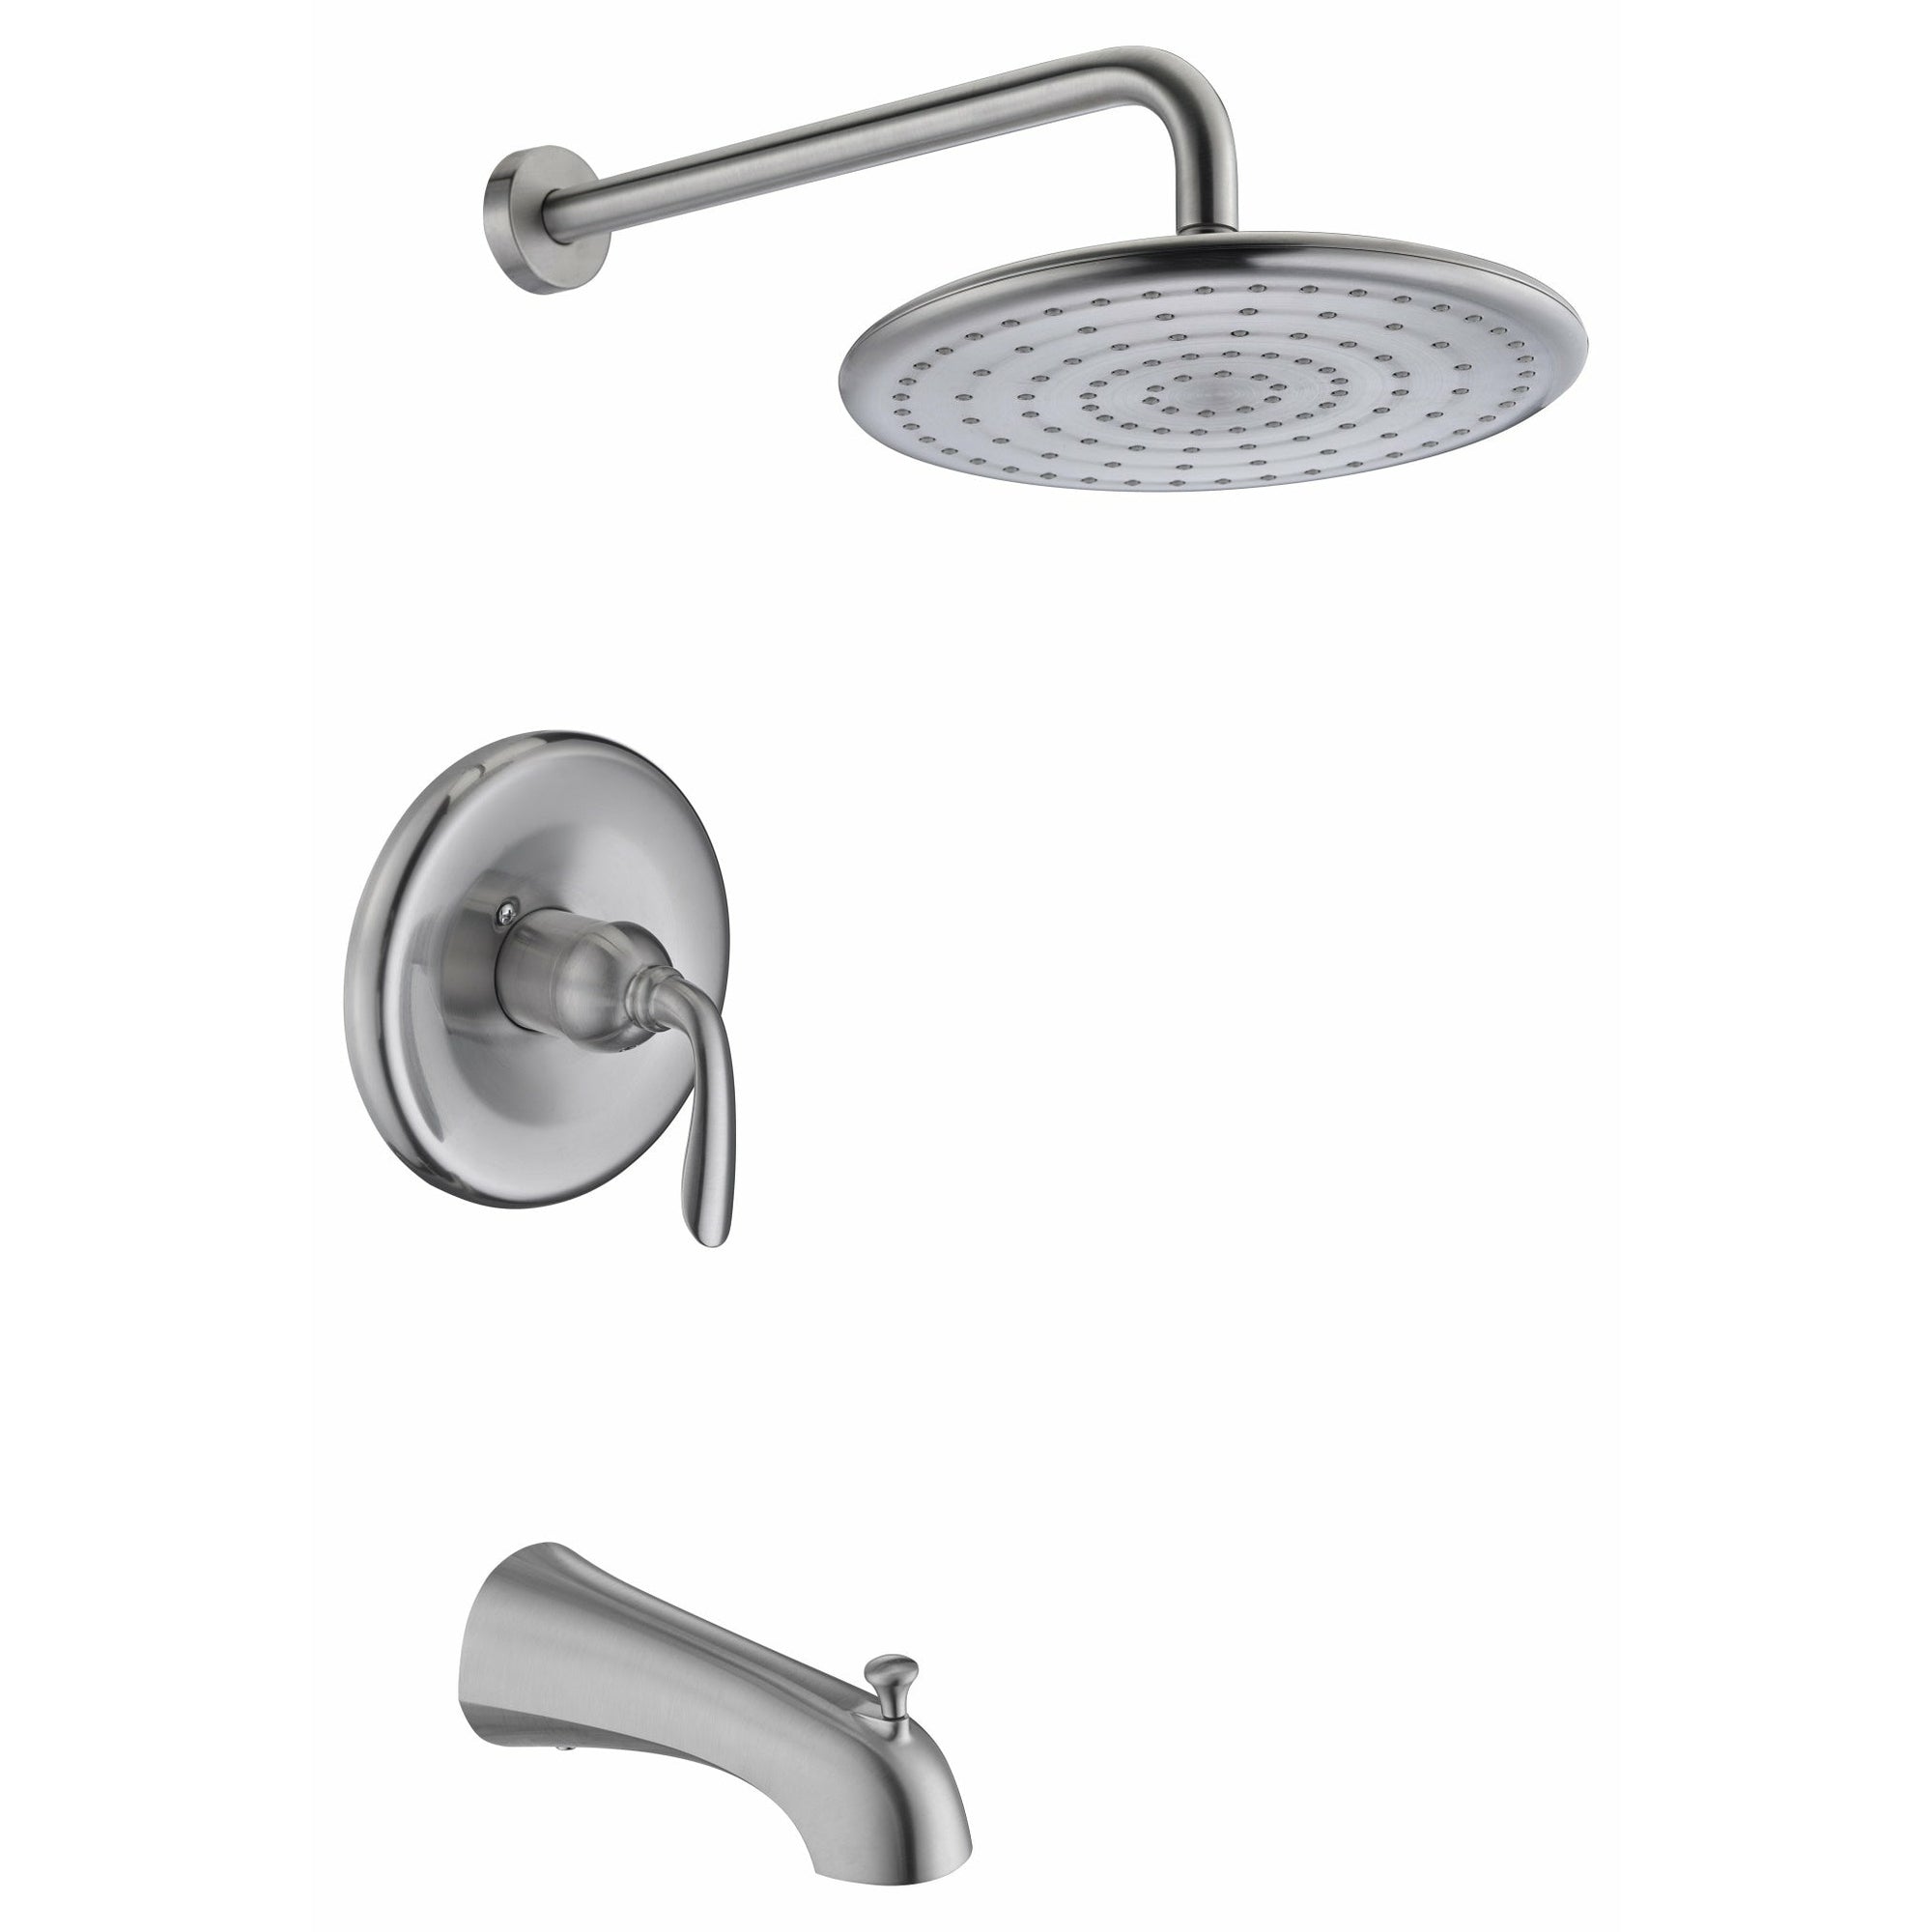 Anzzi Meno Series Single-Handle 1-Spray Tub and Shower Faucet in Brushed Nickel SH-AZ032 - Vital Hydrotherapy